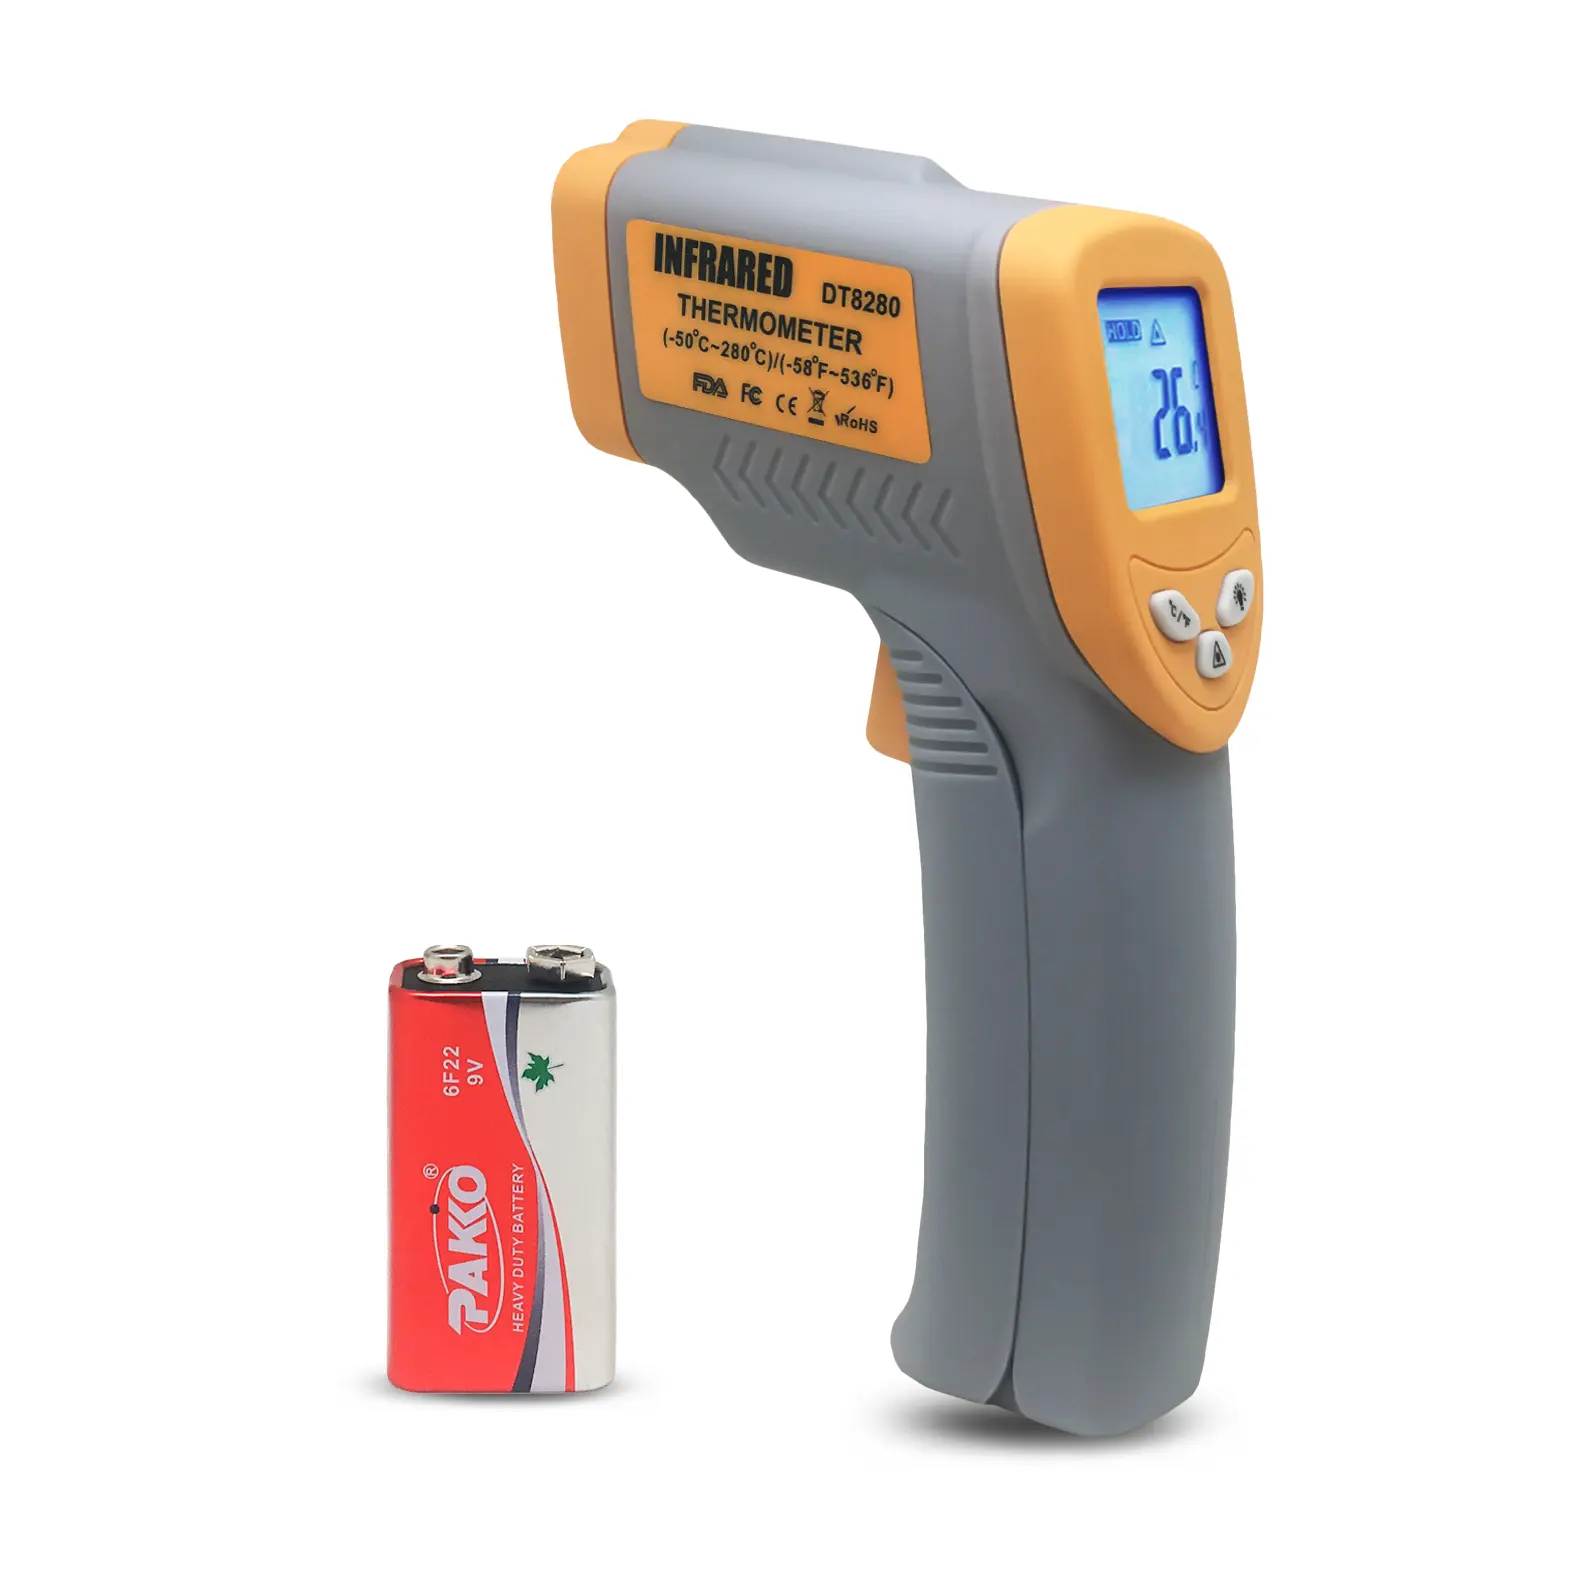 Thermometer Hand Held Thermometer Gun Shape X-laser Non-contact Smart Electronic Thermometer Digital For Industry